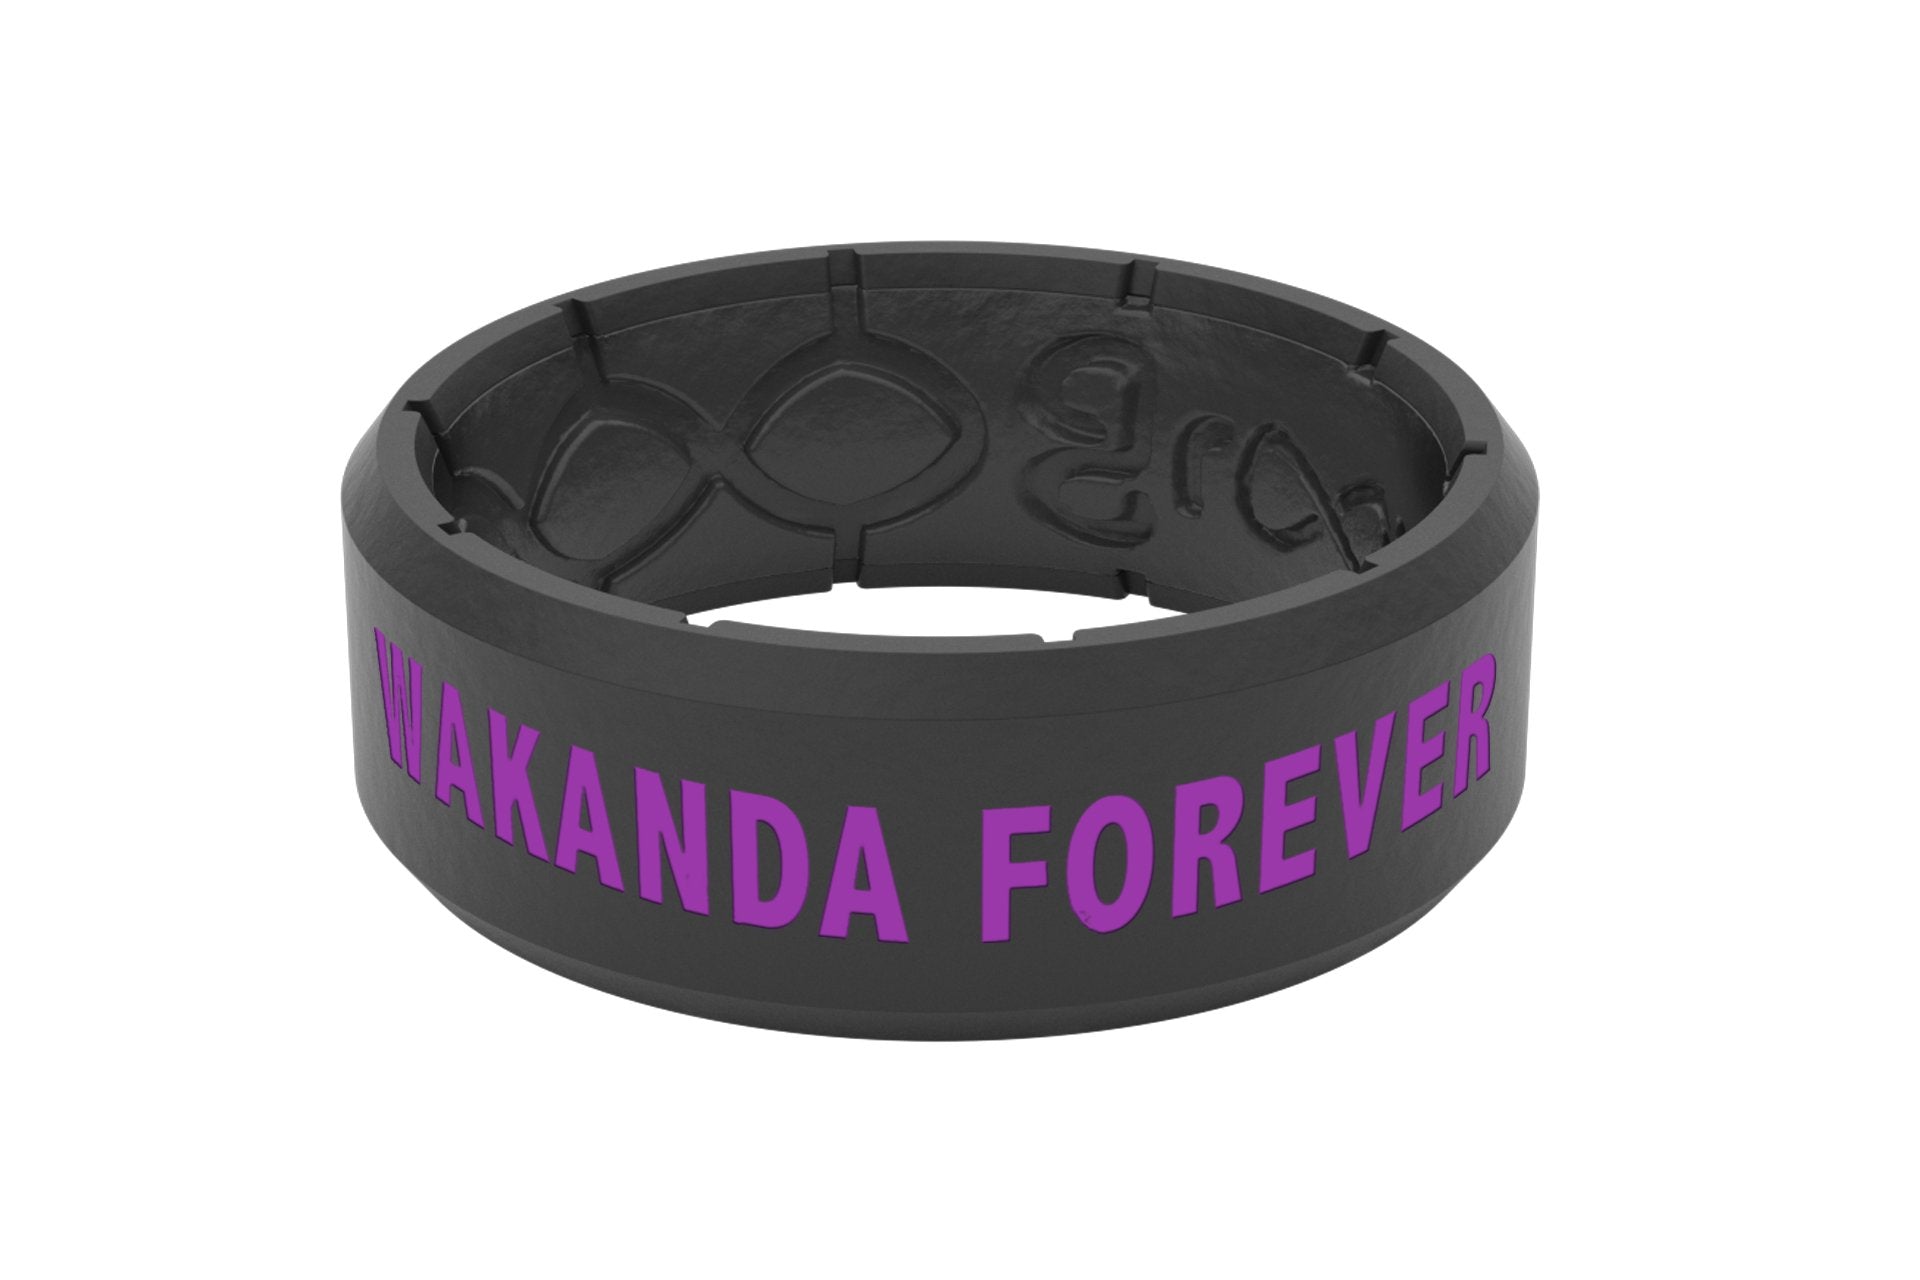 Black Panther Wakanda Forever Icon  viewed from side